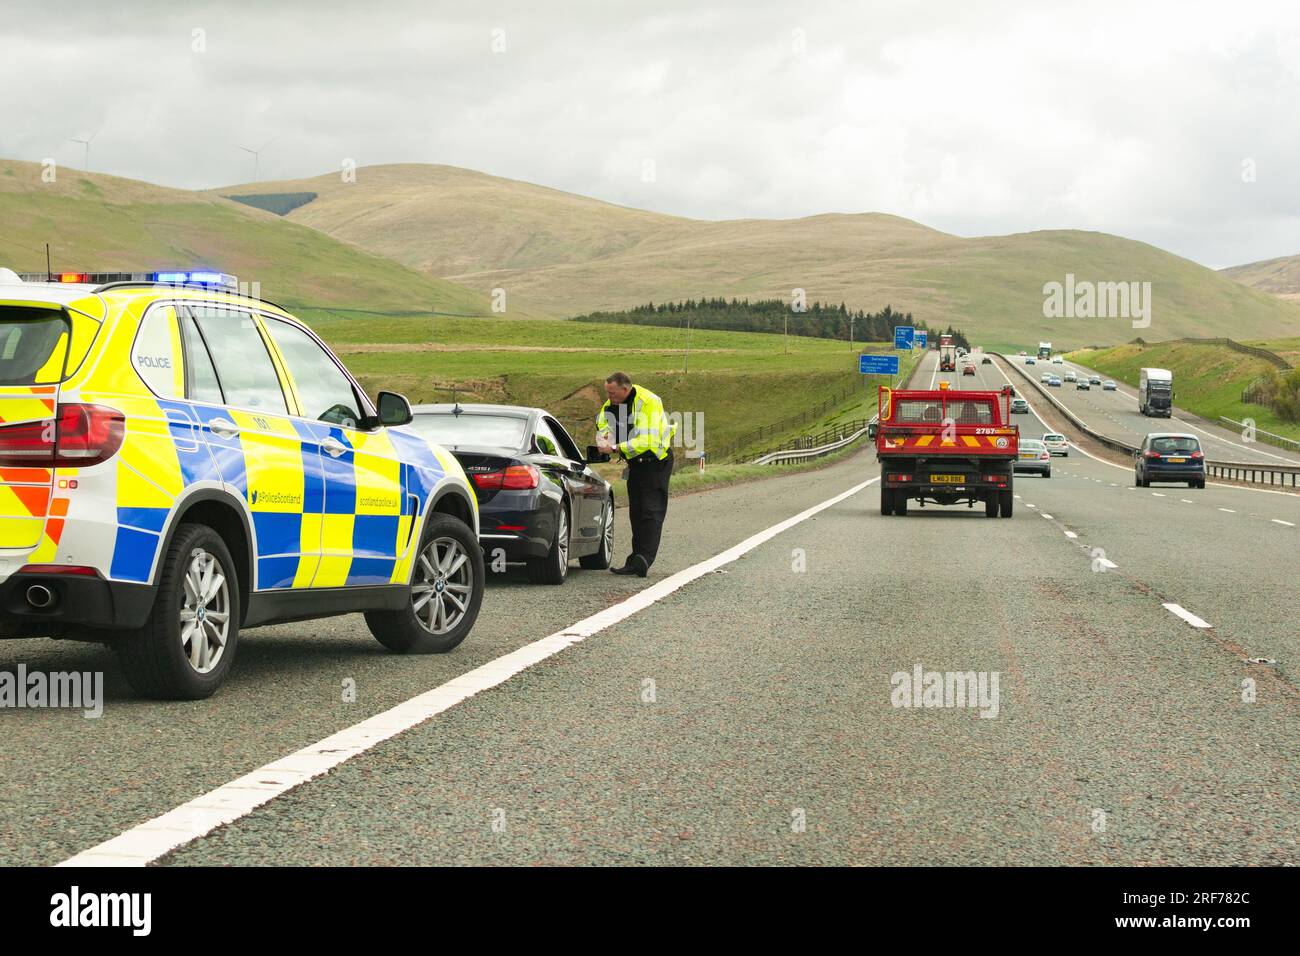 Traffic police officer speaking to the driver of a black bmw car that has been made to pull over on the hard shoulder of the M74 motorway Scotland, UK Stock Photo